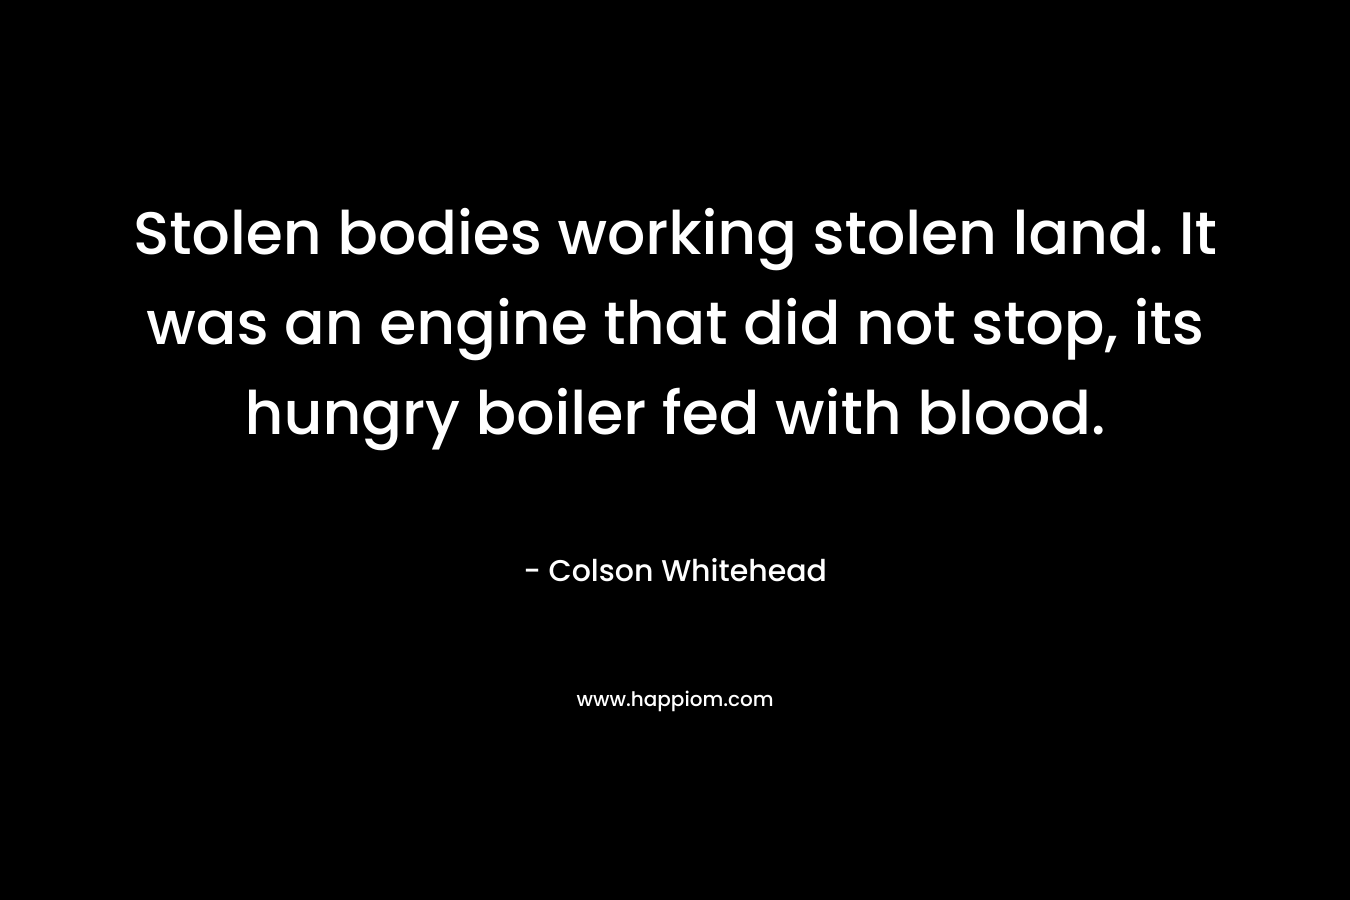 Stolen bodies working stolen land. It was an engine that did not stop, its hungry boiler fed with blood. – Colson Whitehead